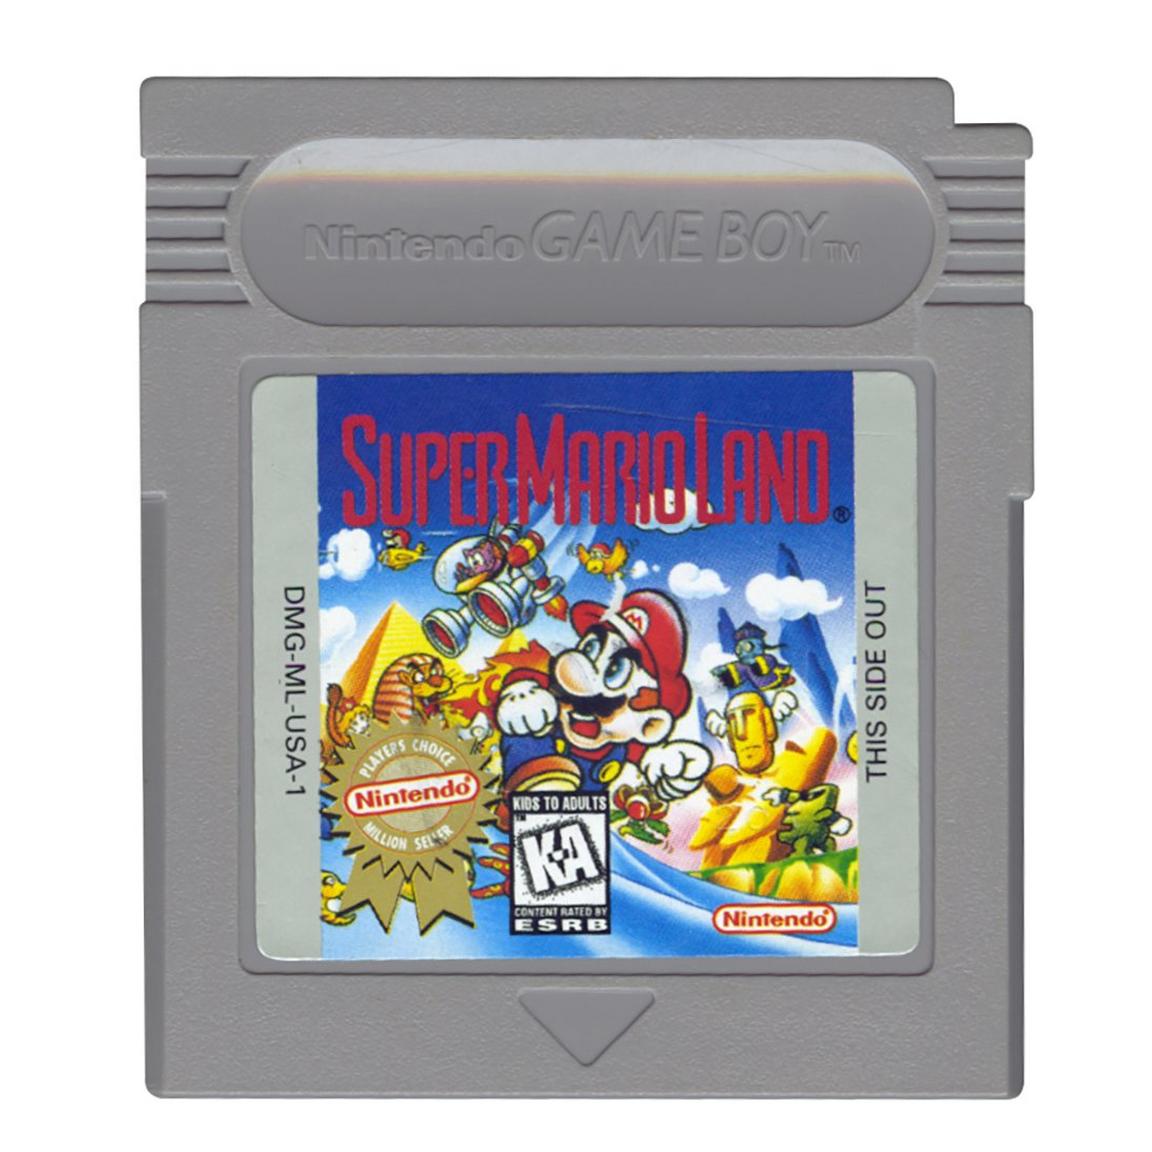 Super Mario Land - Game Boy, Pre-Owned